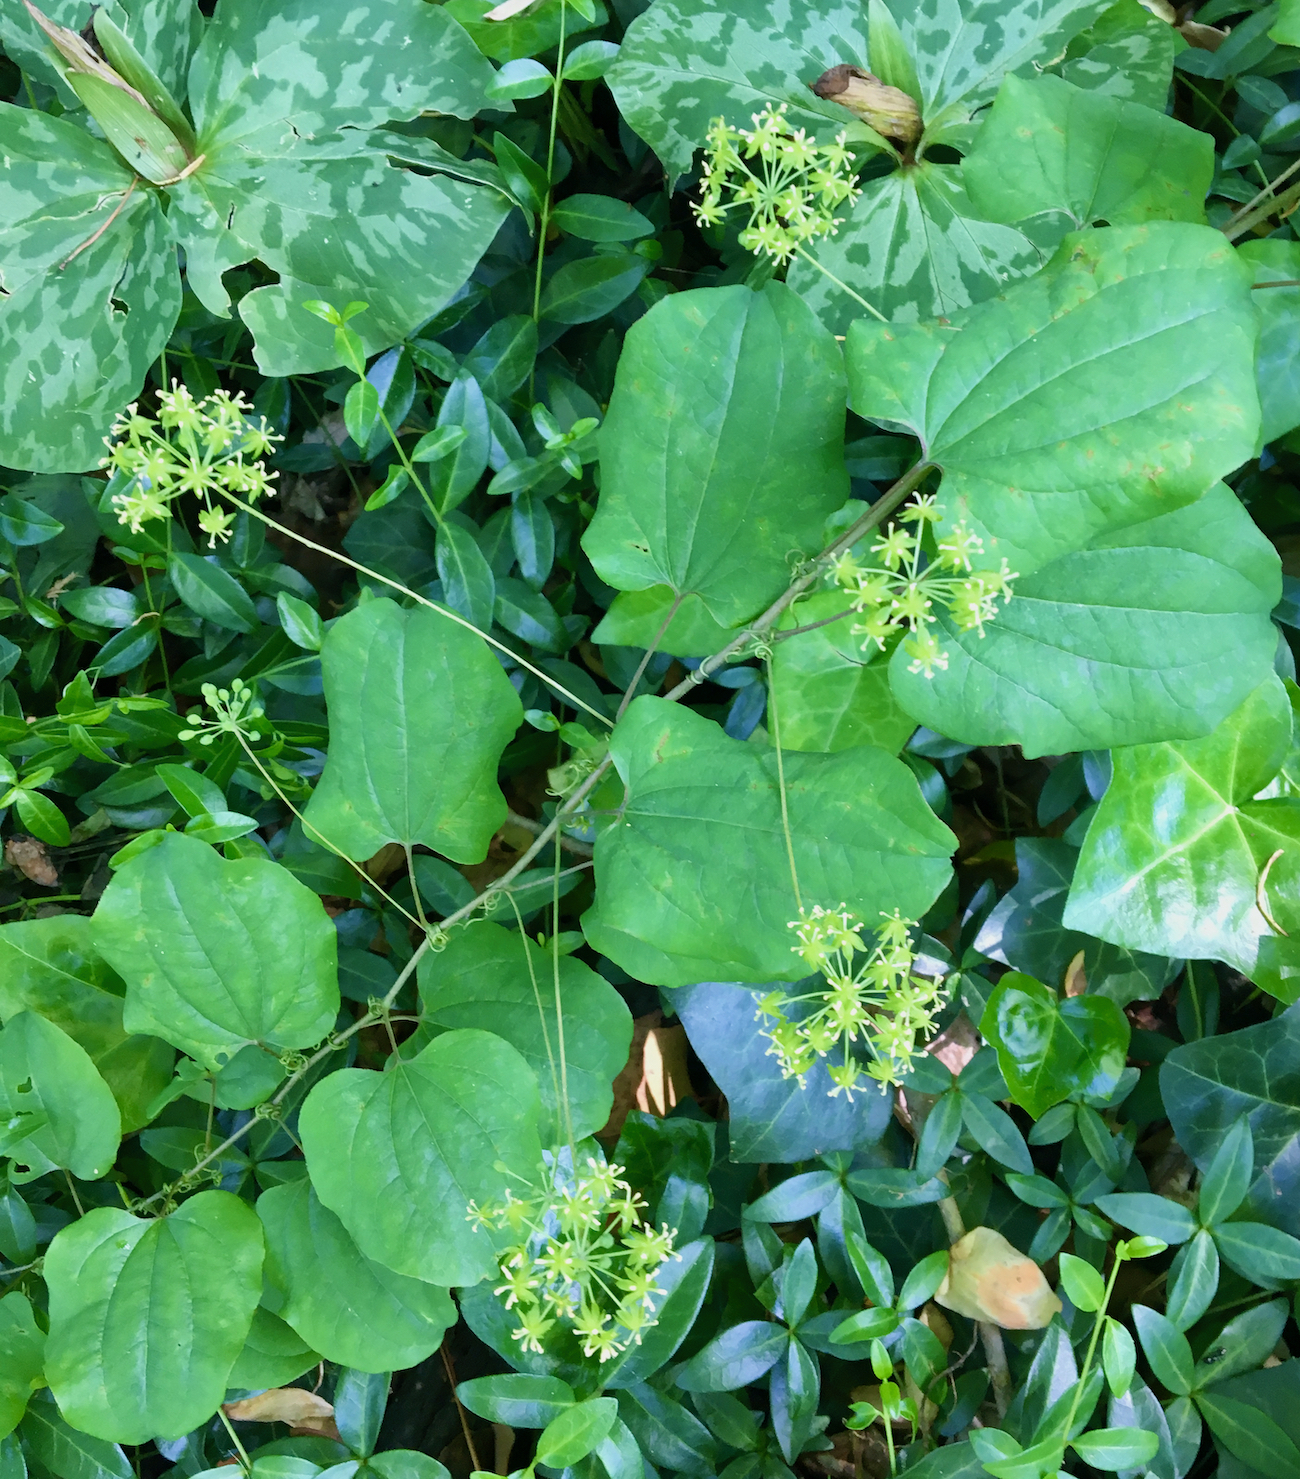 The Scientific Name is Smilax herbacea. You will likely hear them called Common Carrionflower, Carrion-vine. This picture shows the Smelly flowers (hence the name 